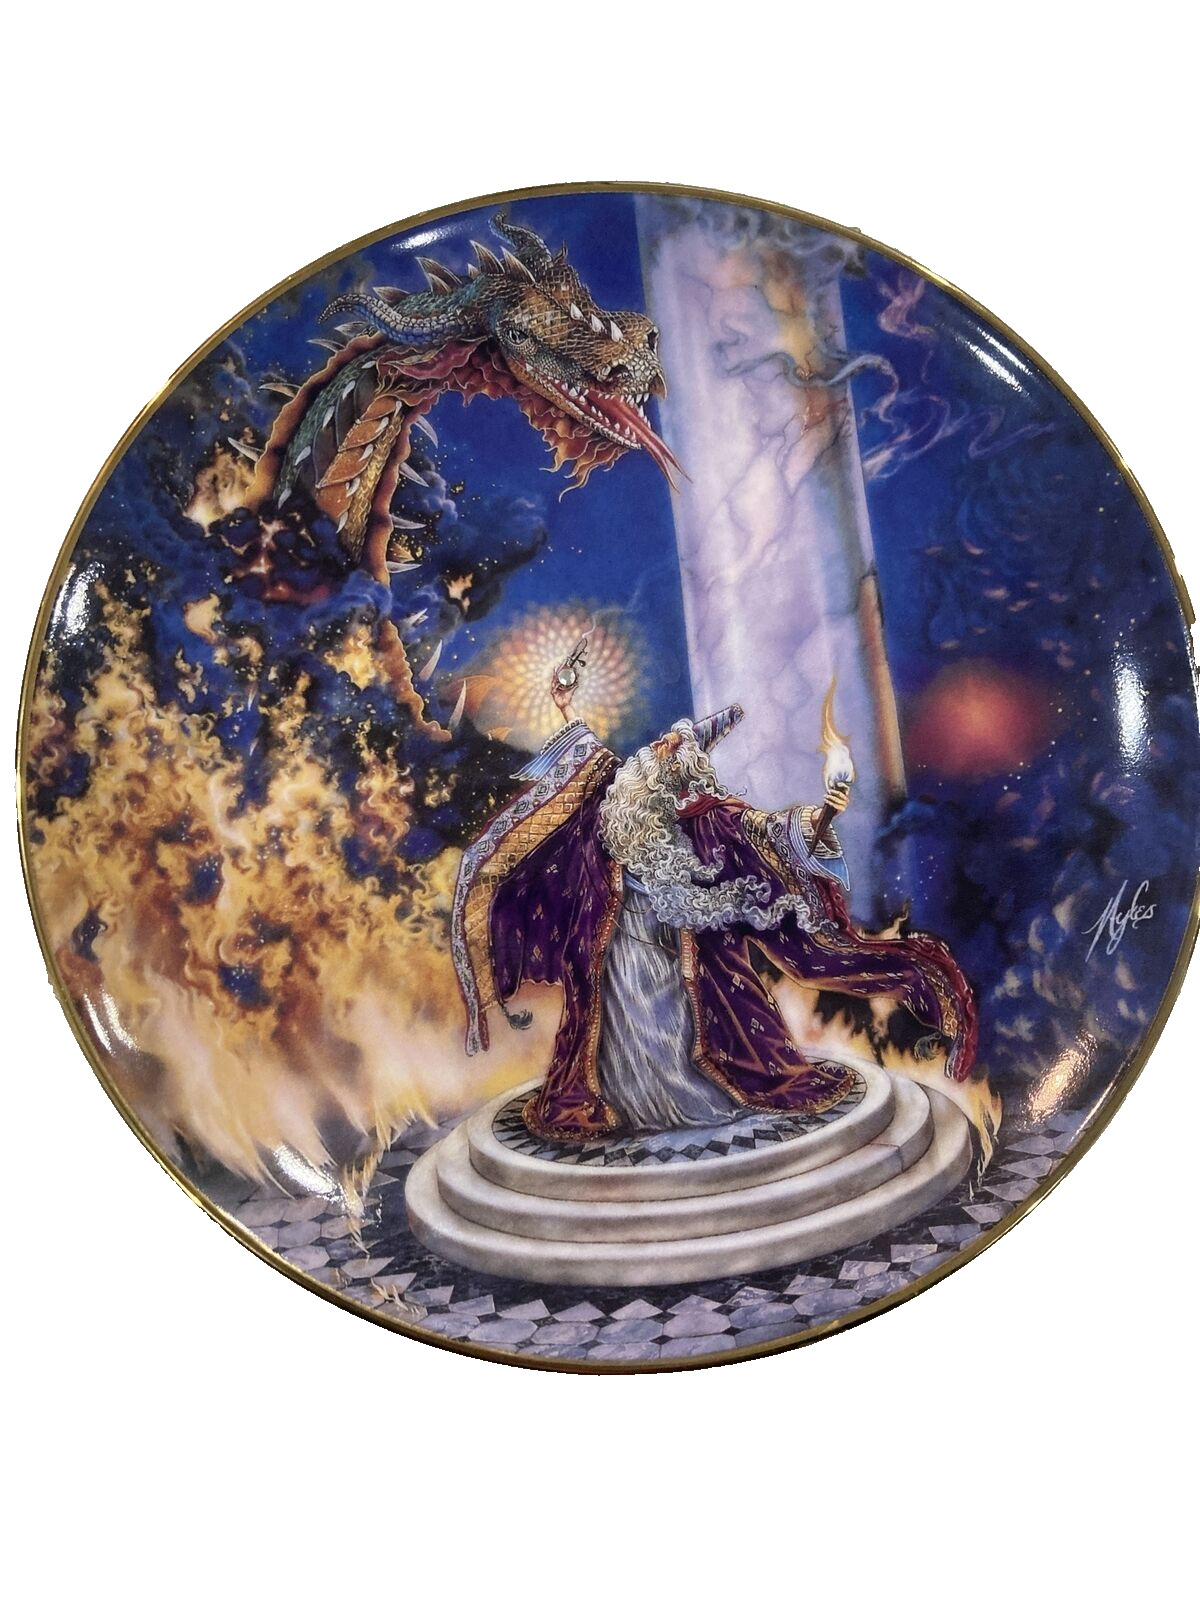 THE DRAGON MASTER ROYAL DOULTON PLATE FRANKLIN MINT MYLES PINKNEY WIZARD DRAGON